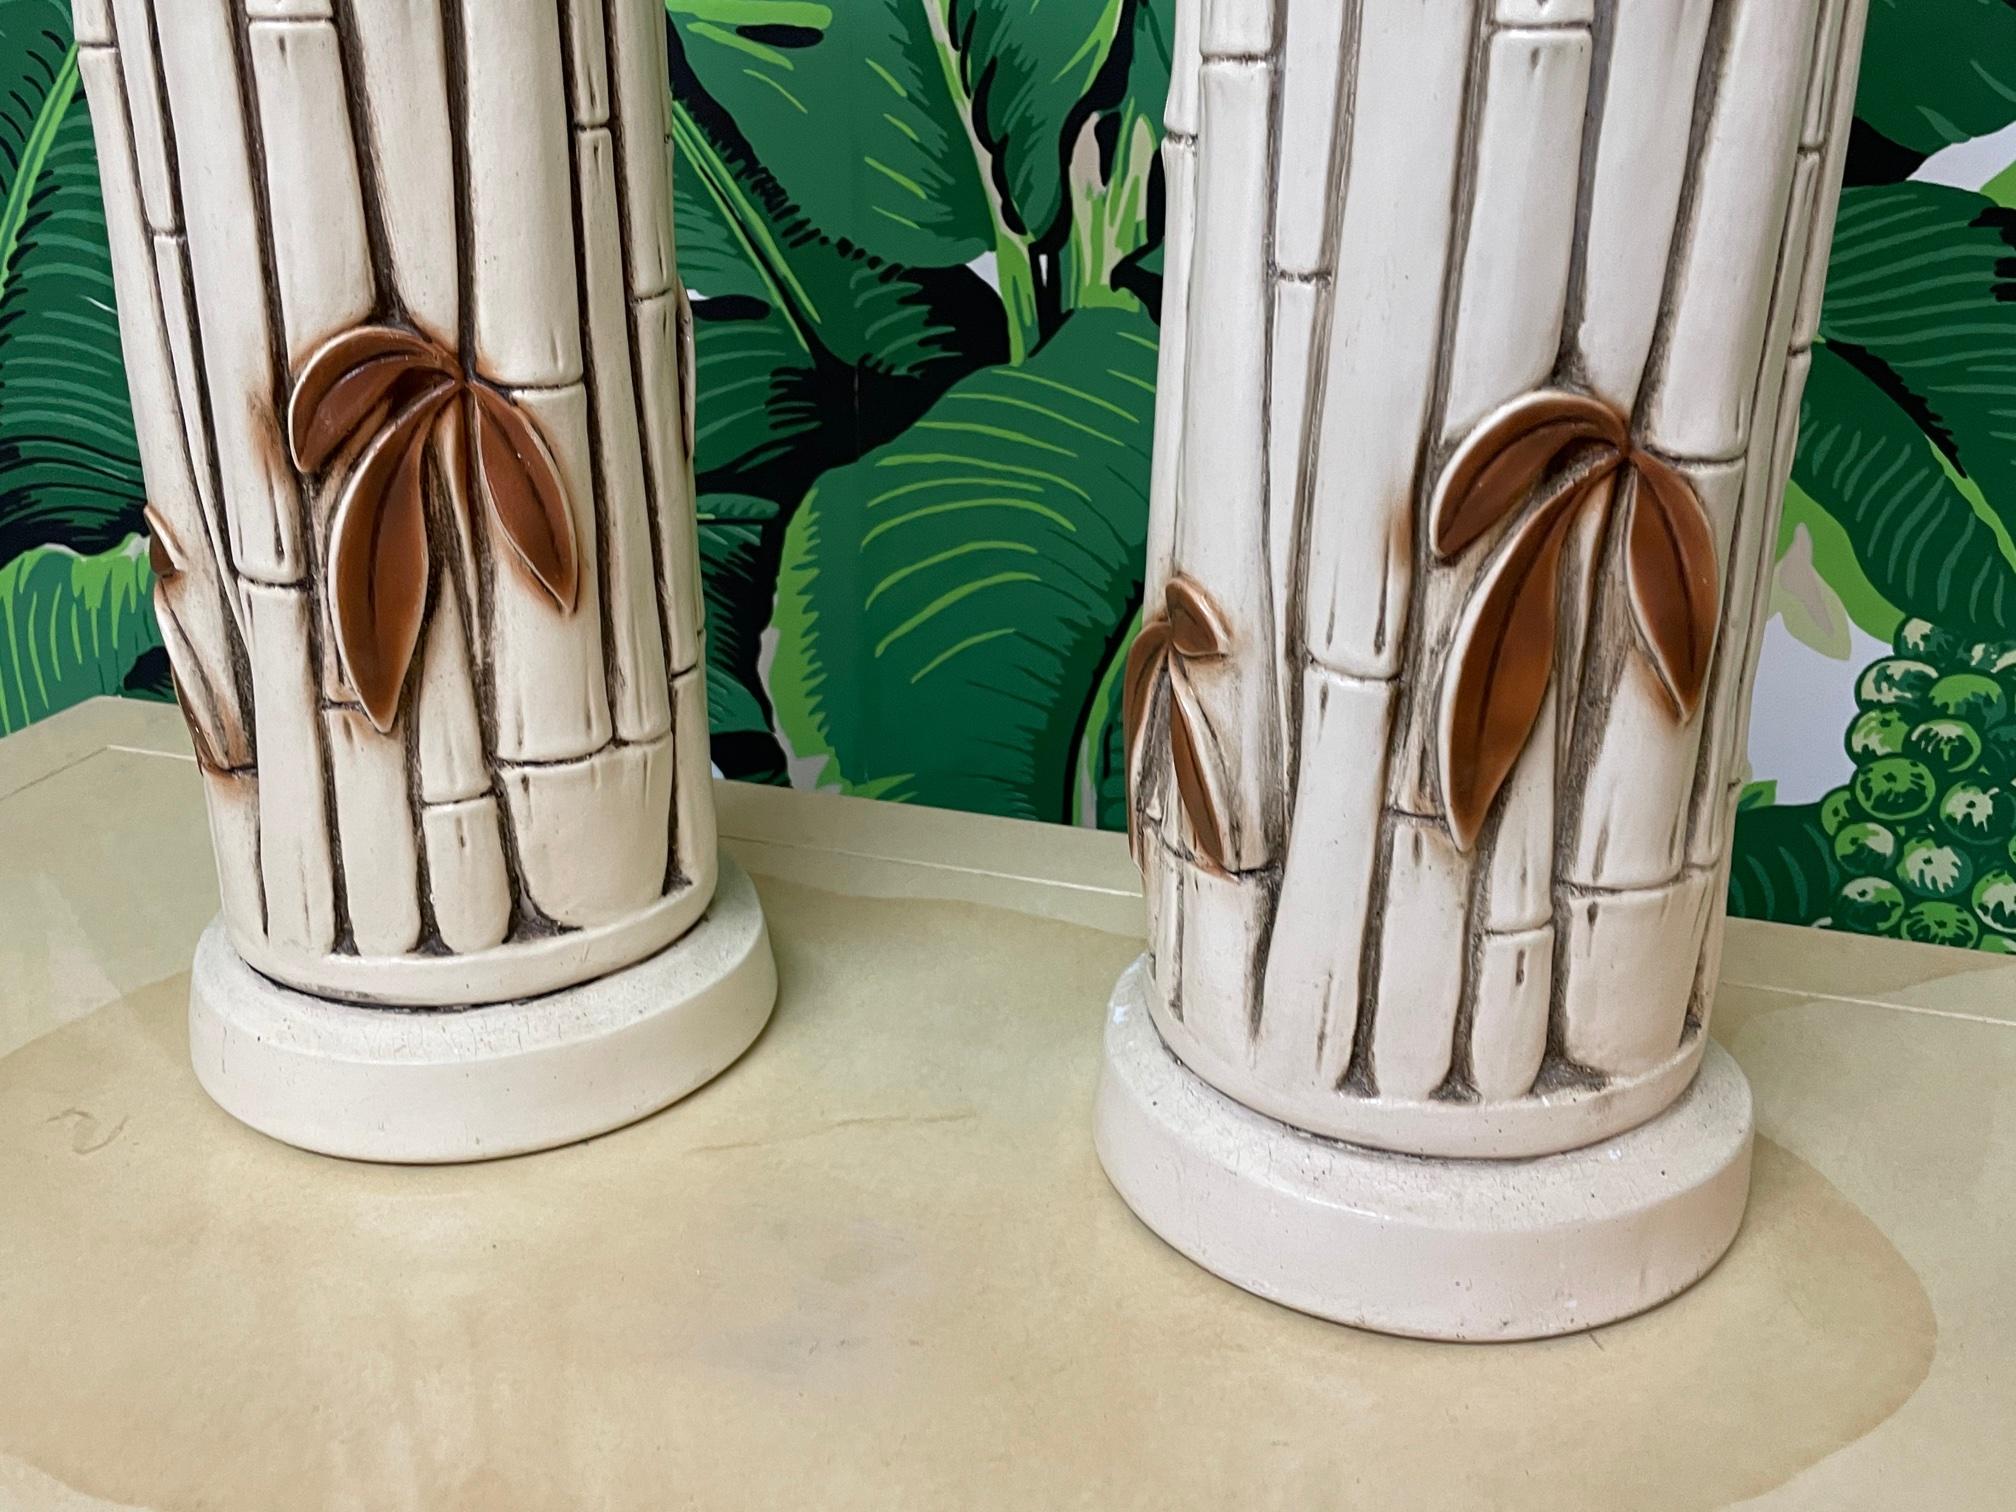 Pair of vintage table lamps in faux bamboo style. Ceramic/plaster composition. Very good condition with only very minor imperfections consistent with age.